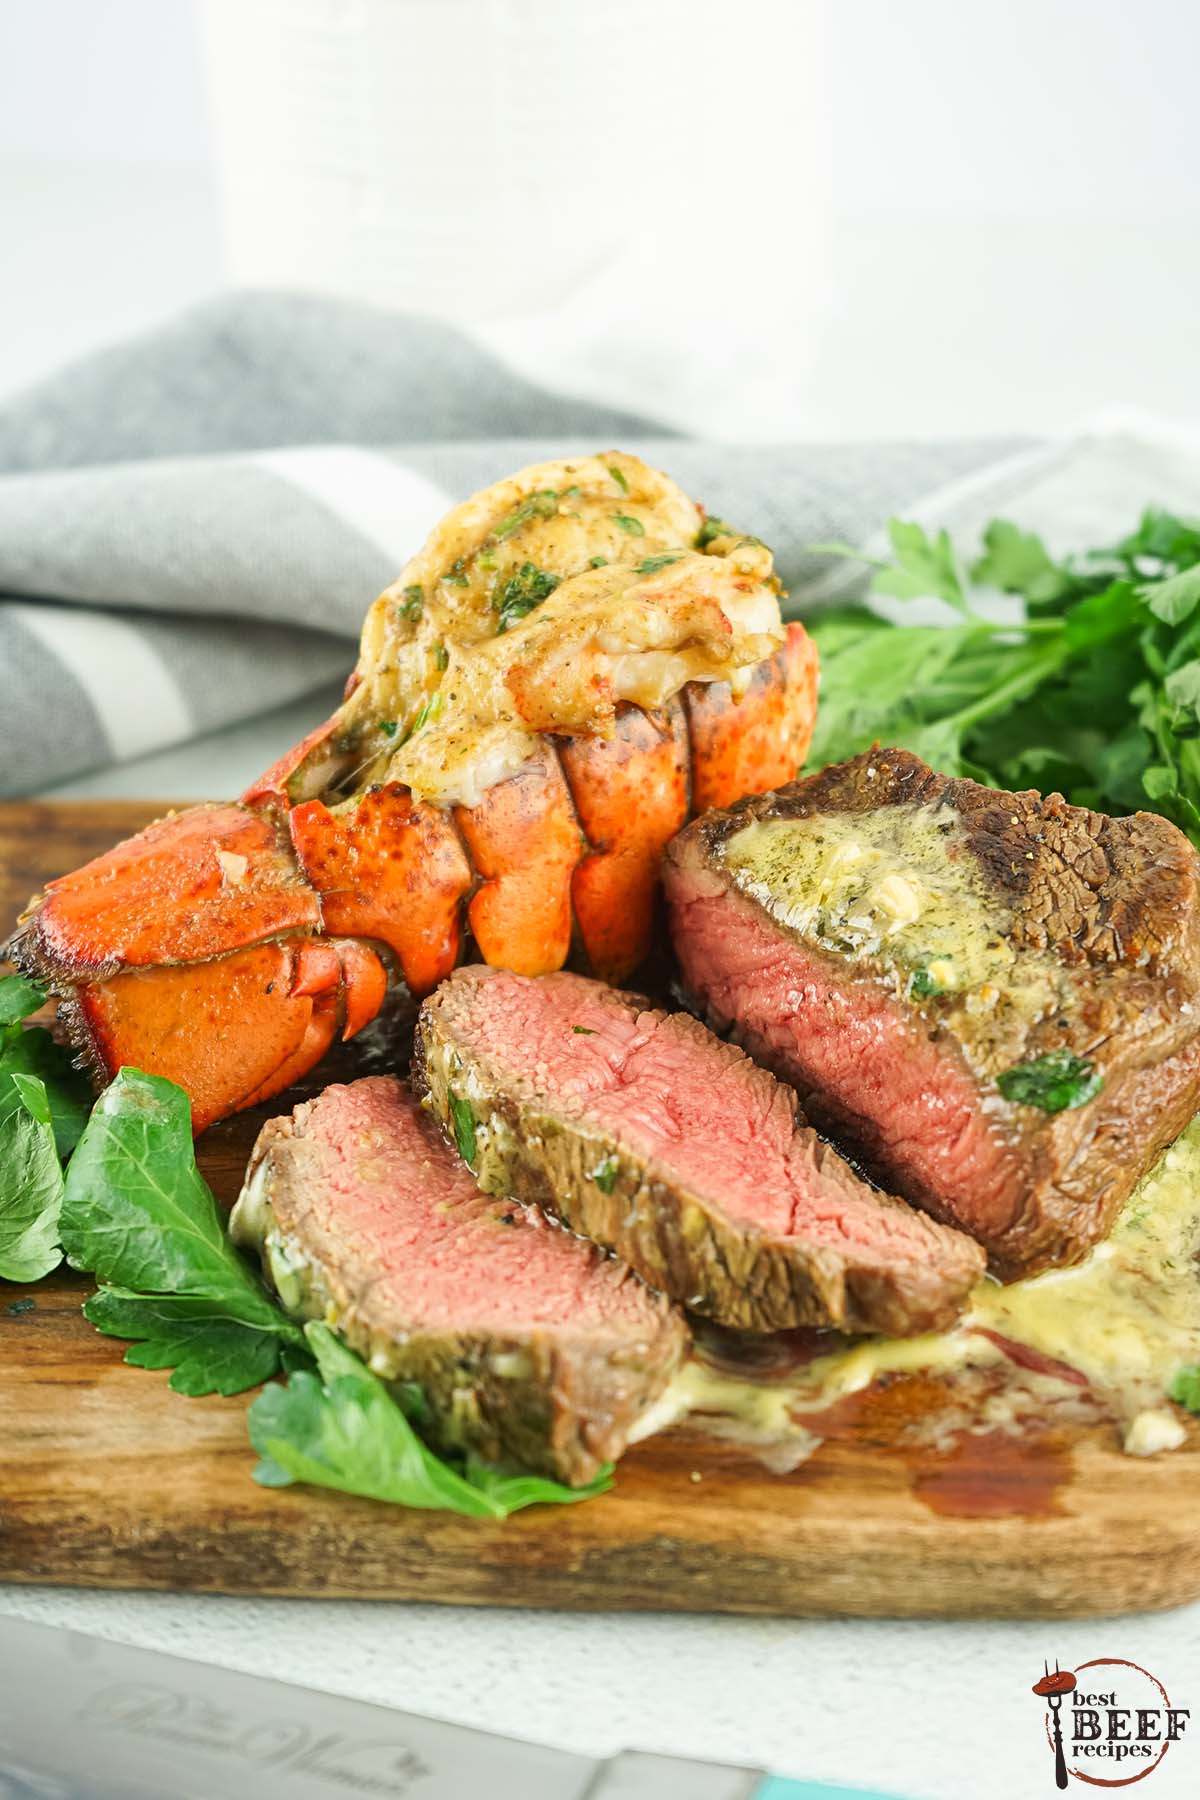 sliced grilled filet mignon next to lobster tail with bearnaise sauce